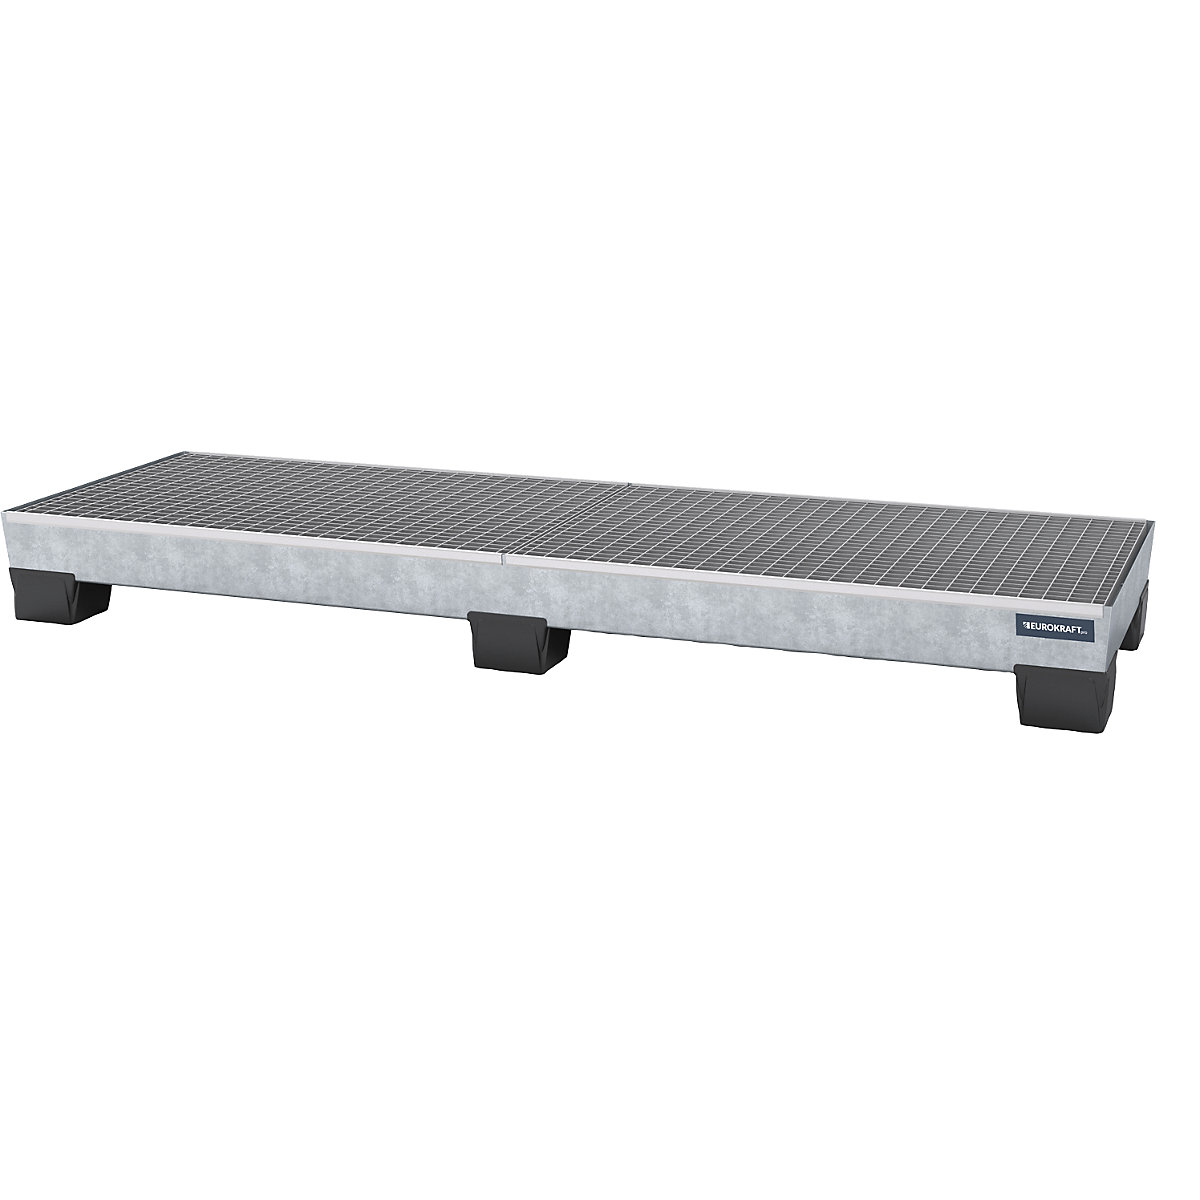 Steel sump tray with plastic feet – eurokraft pro, LxWxH 2470 x 815 x 255 mm, hot dip galvanised, with grate-5